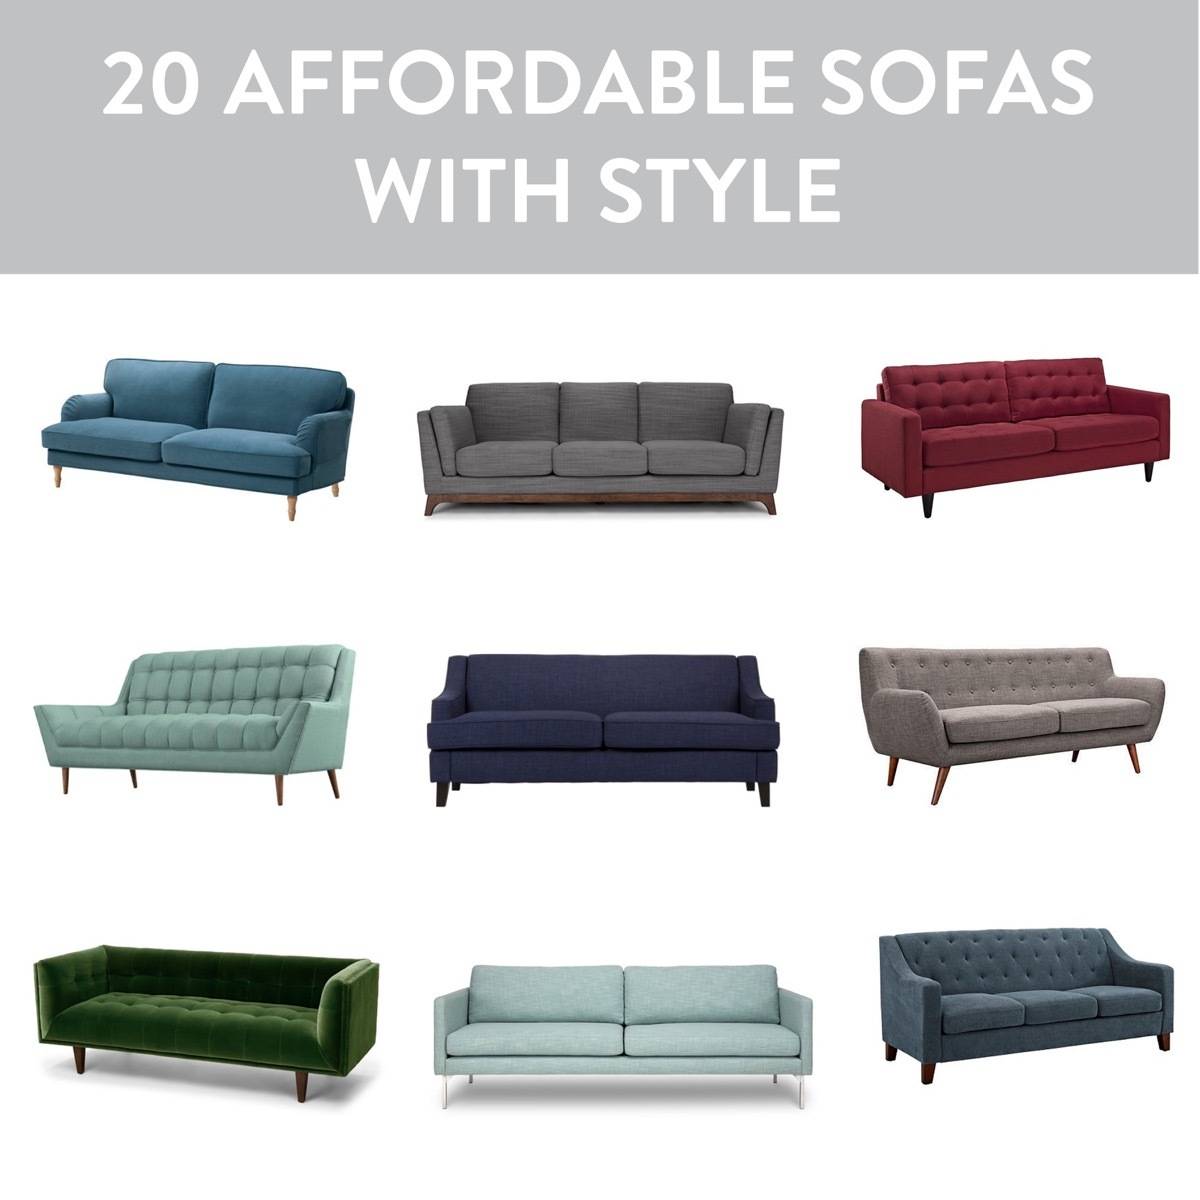 20 couches that won't break the bank!